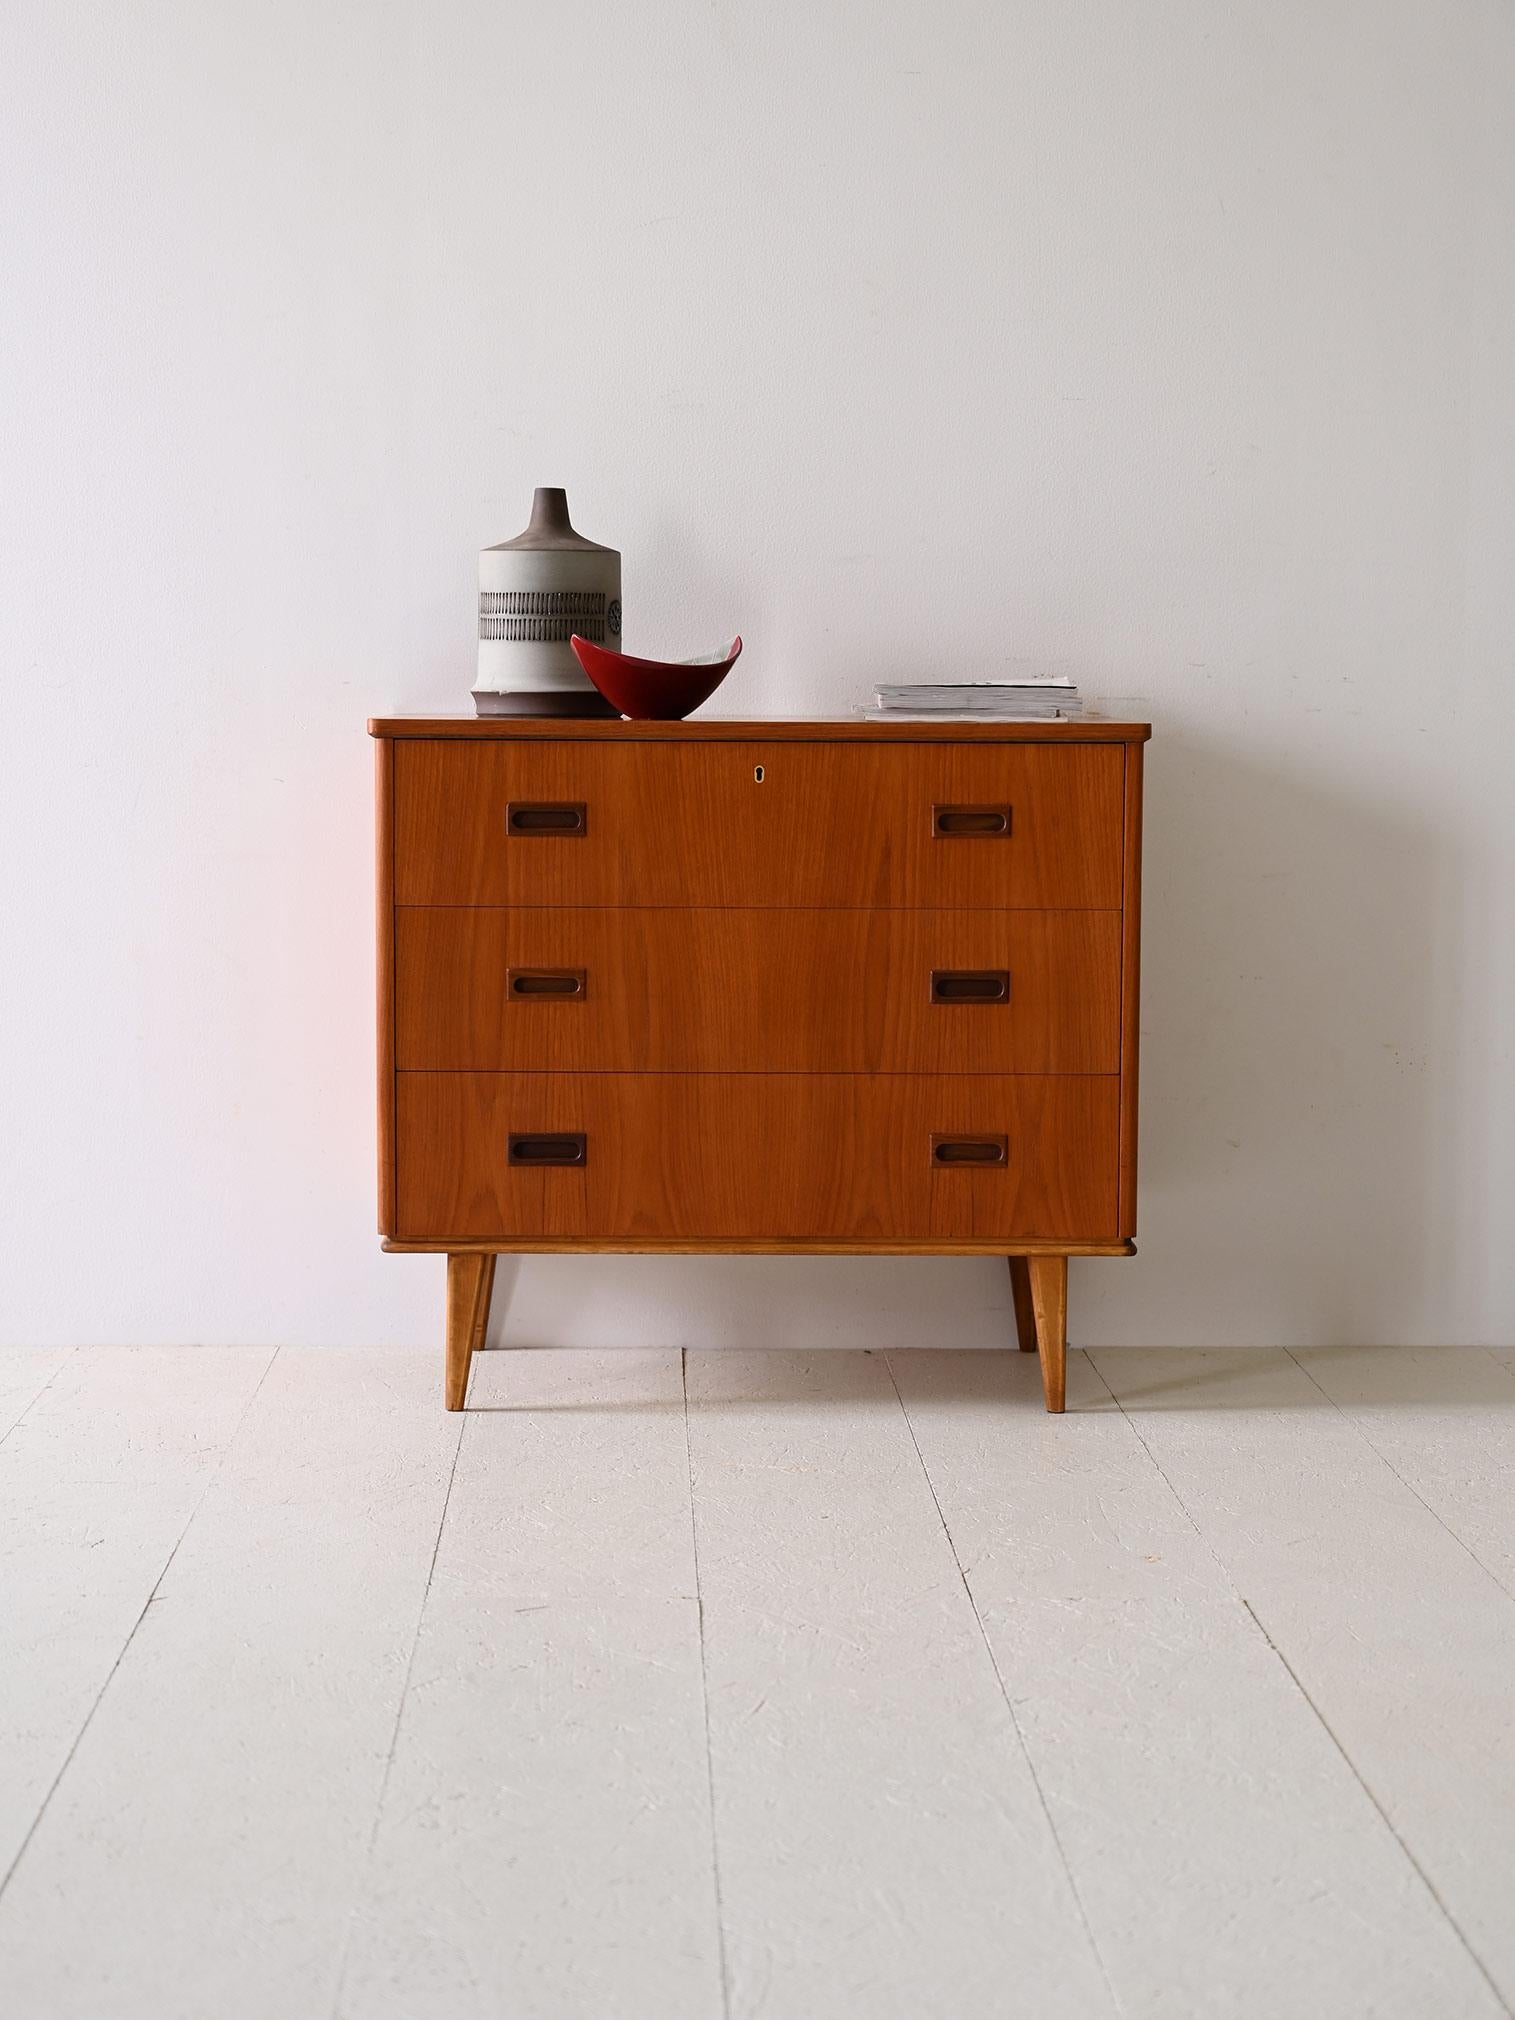 Authentic 3-drawer chest of drawers from the original Scandinavian manufacture of the 1960s. 

Its design is distinctive, with a top featuring beveled corners and conical legs typical of  Northern Europe, lending a unique elegance.

The drawers,